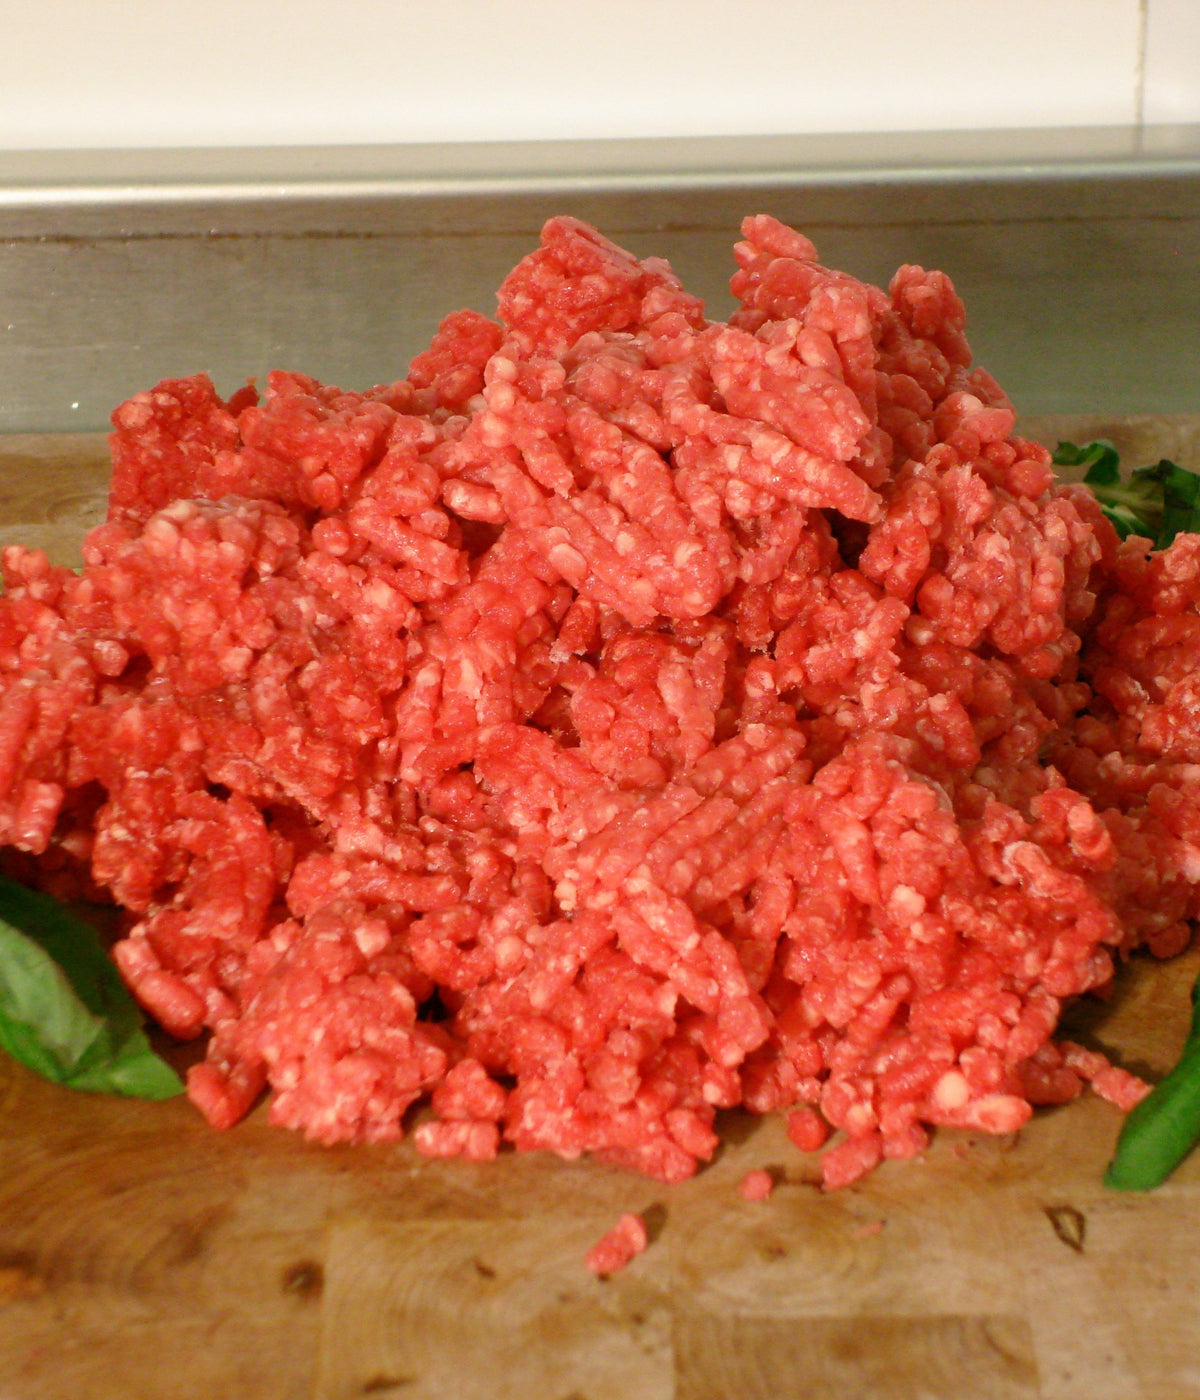 Mince Beef